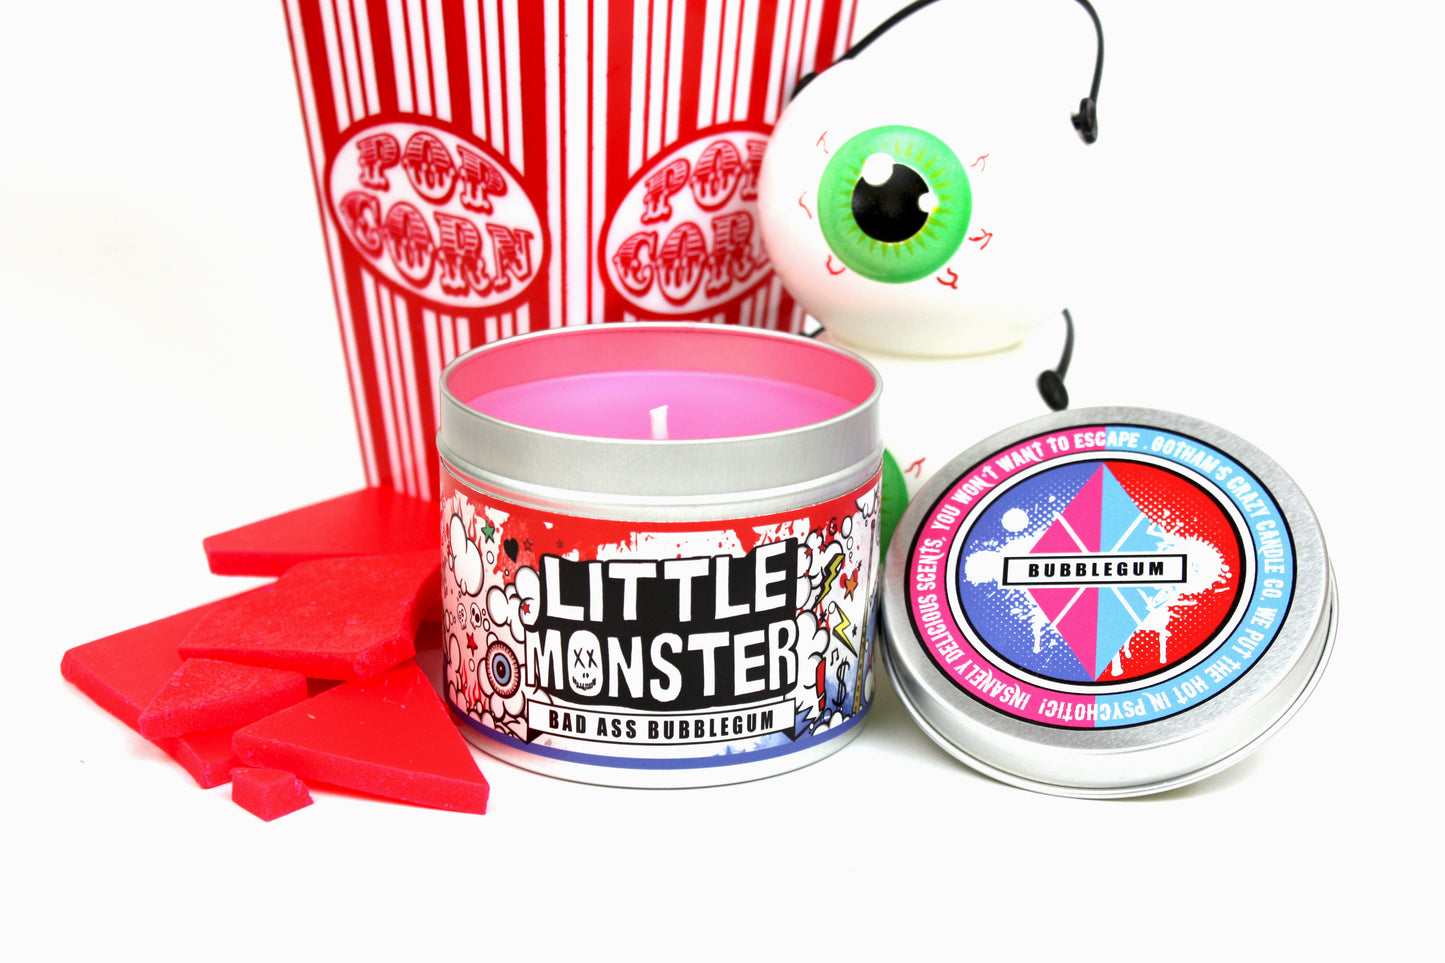 Little Monster bubblegum scented candle by Happy Piranha.